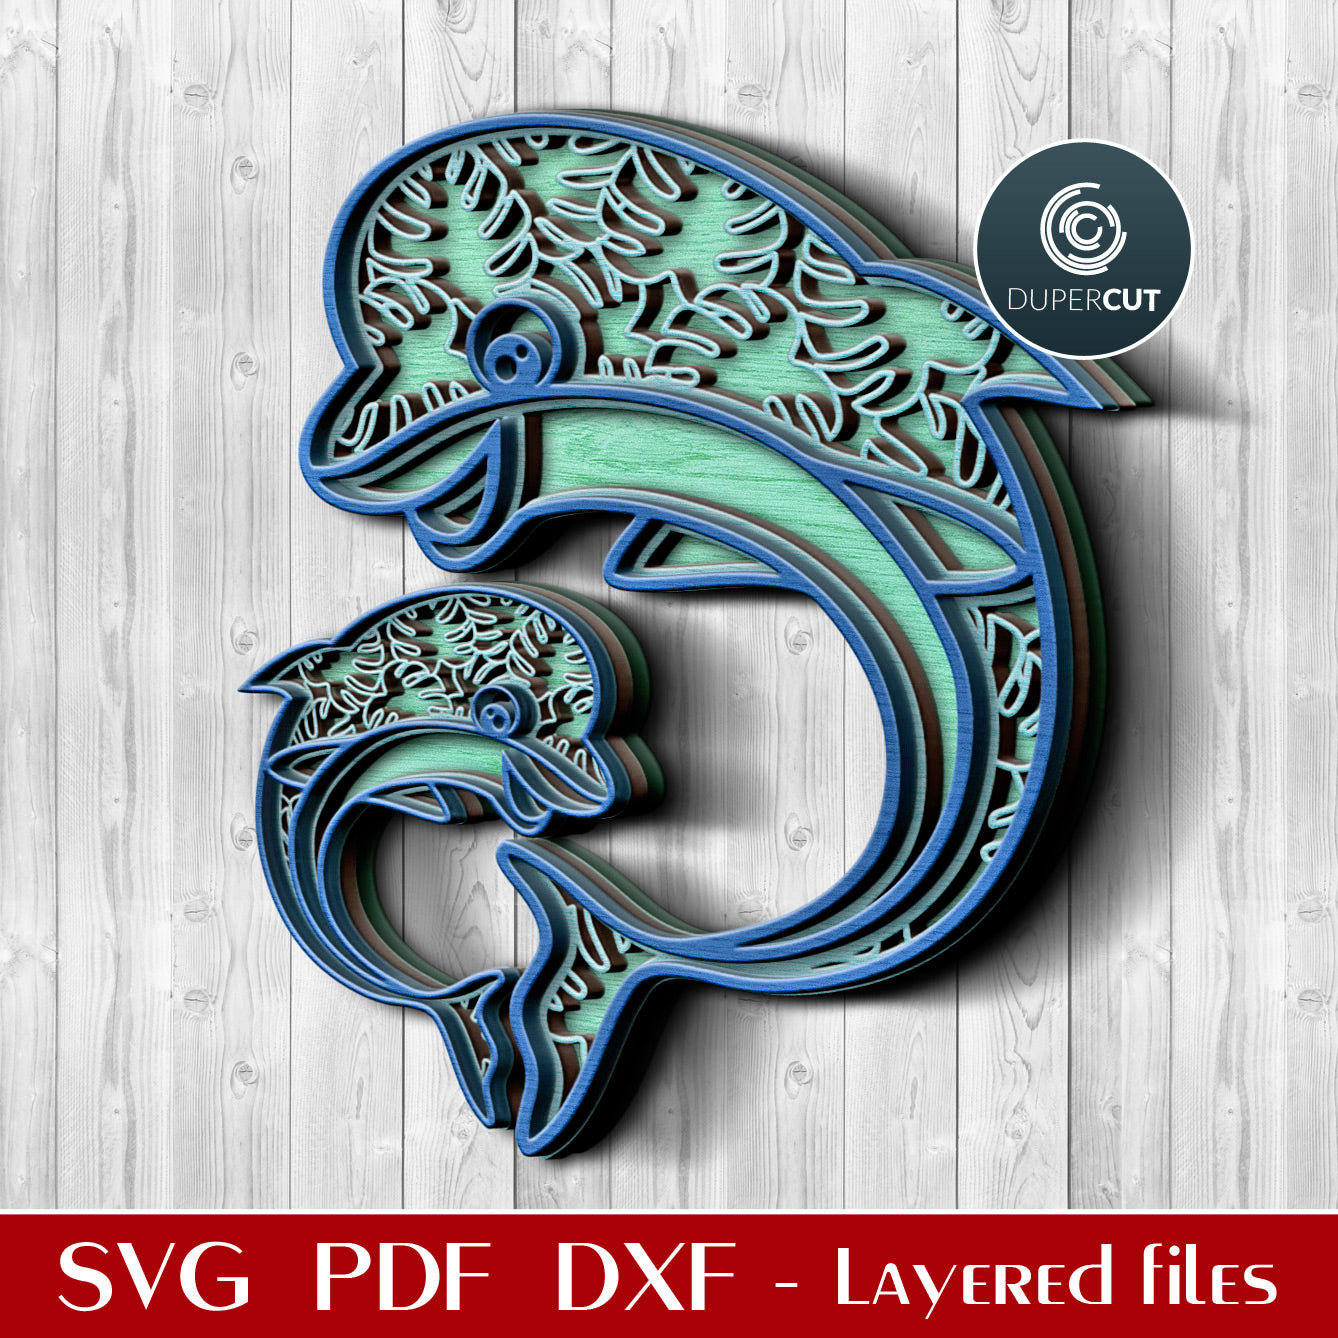 Dolphin family - cutting template - SVG PDF DXF layered files for Glowforge, Cricut, Silhouette Cameo, CNC laser machines by DuperCut